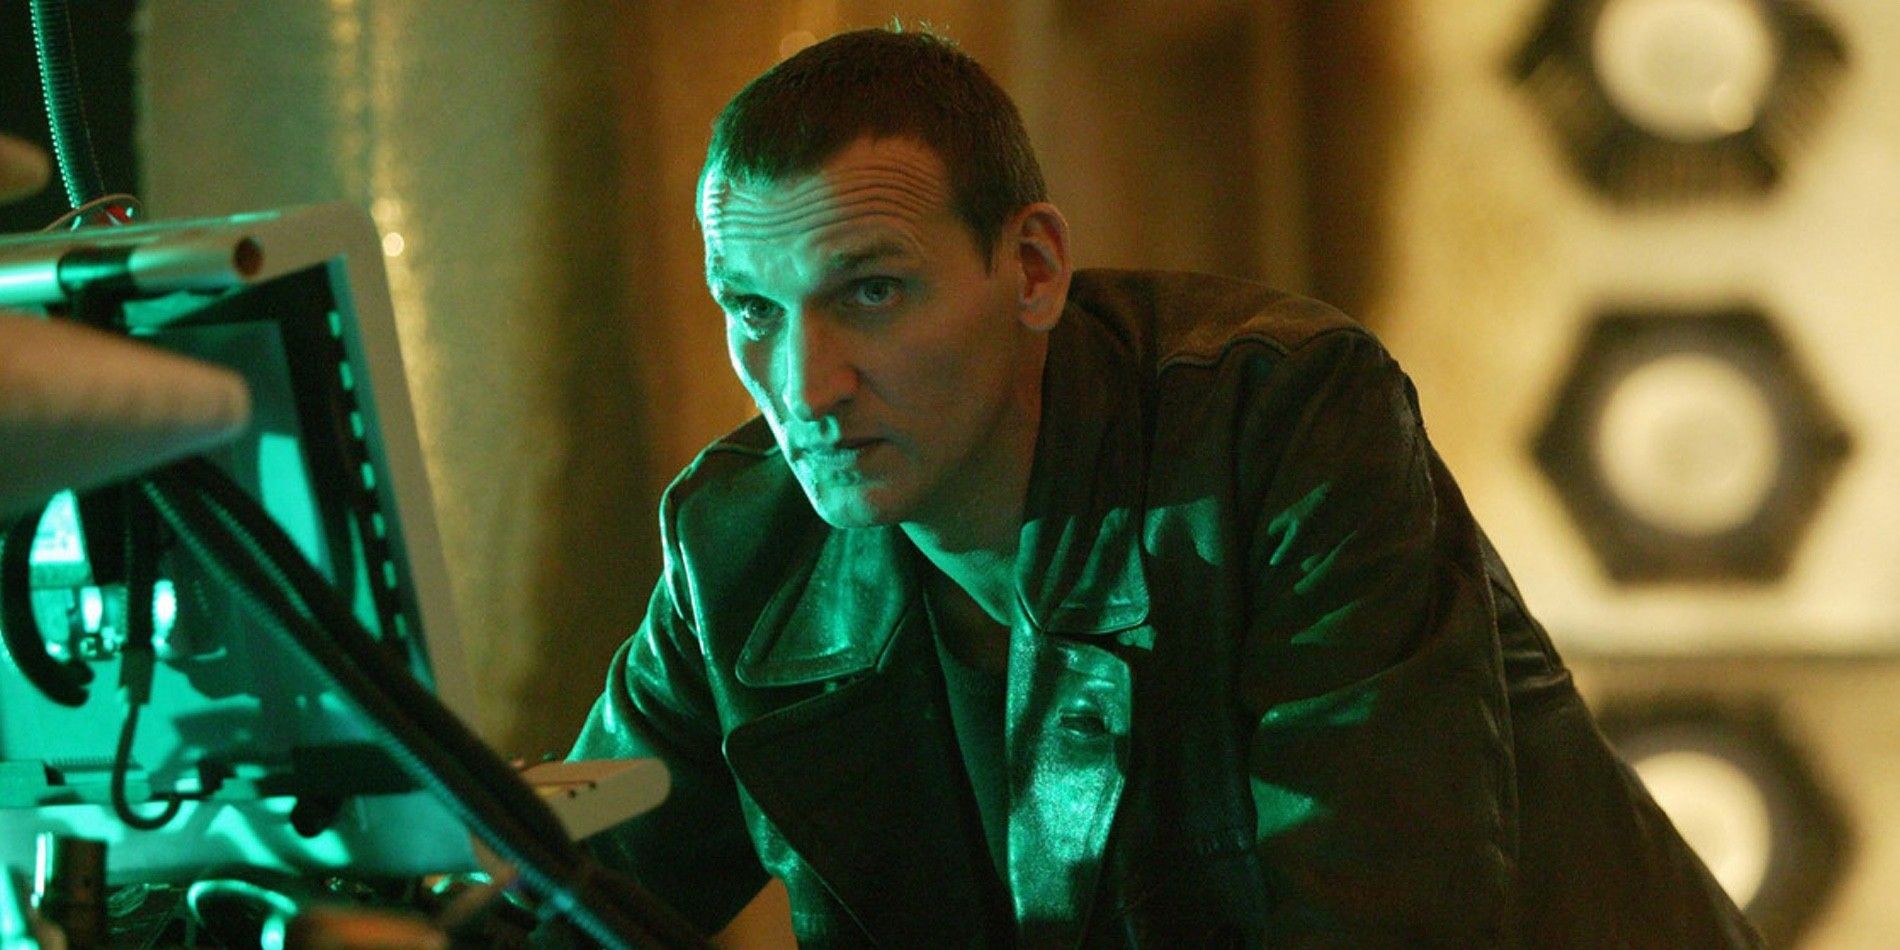 Christopher Eccleston as the Ninth Doctor in Doctor Who